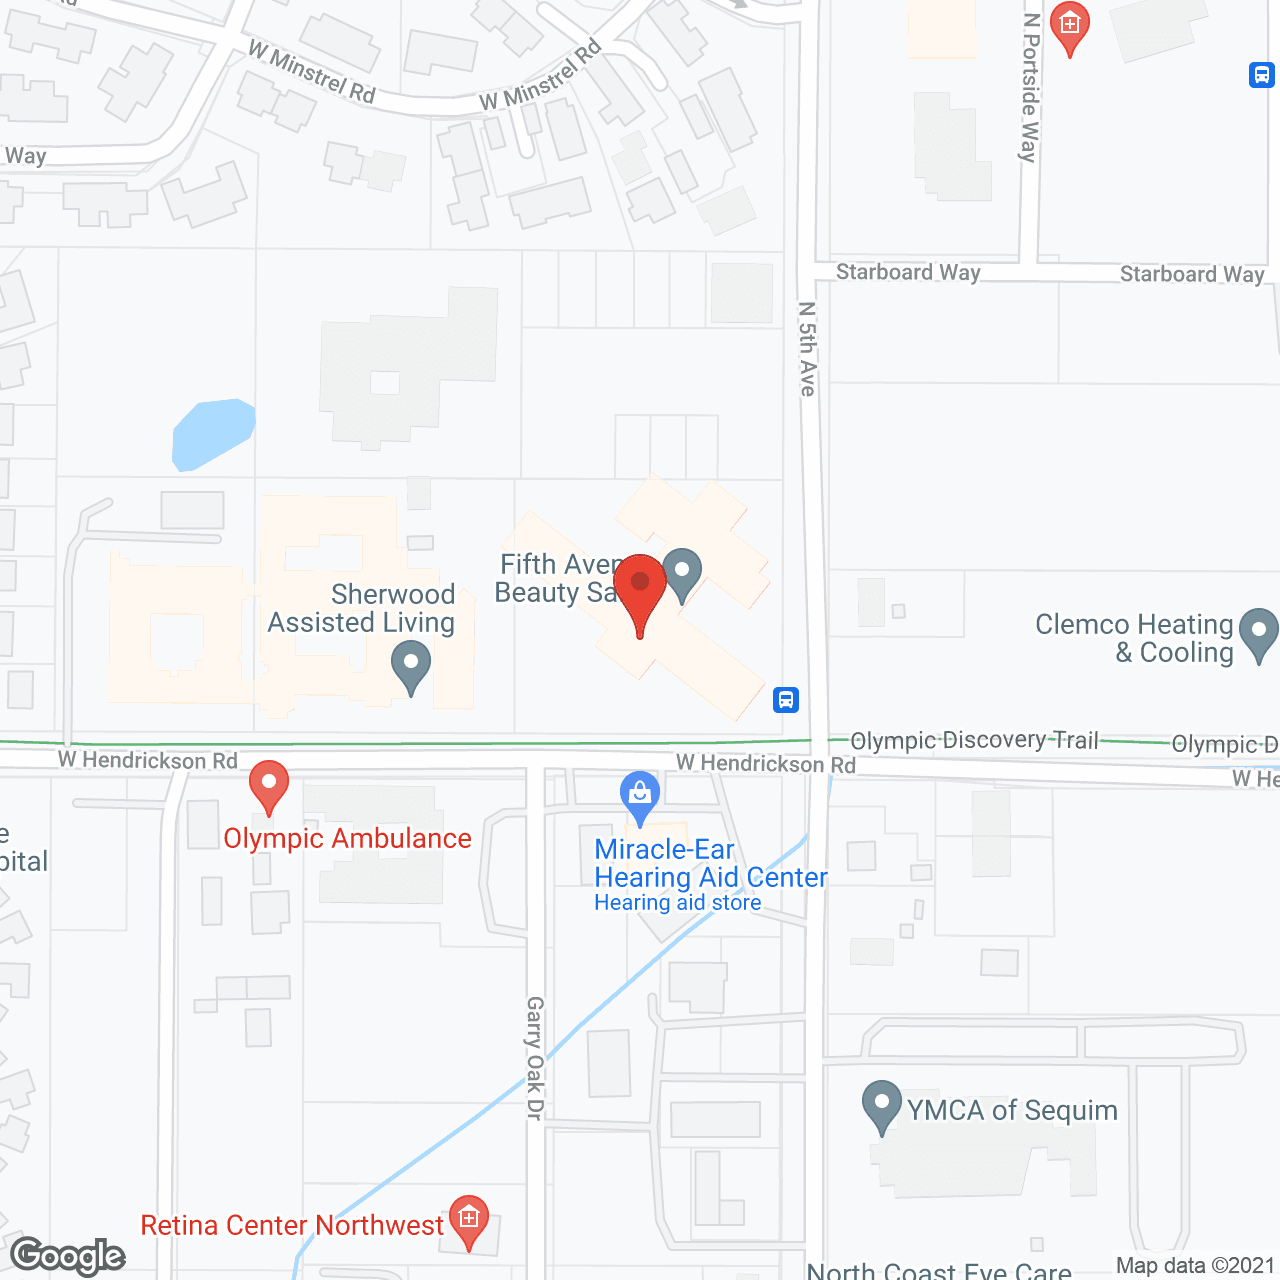 Fifth Avenue Retirement Ctr in google map